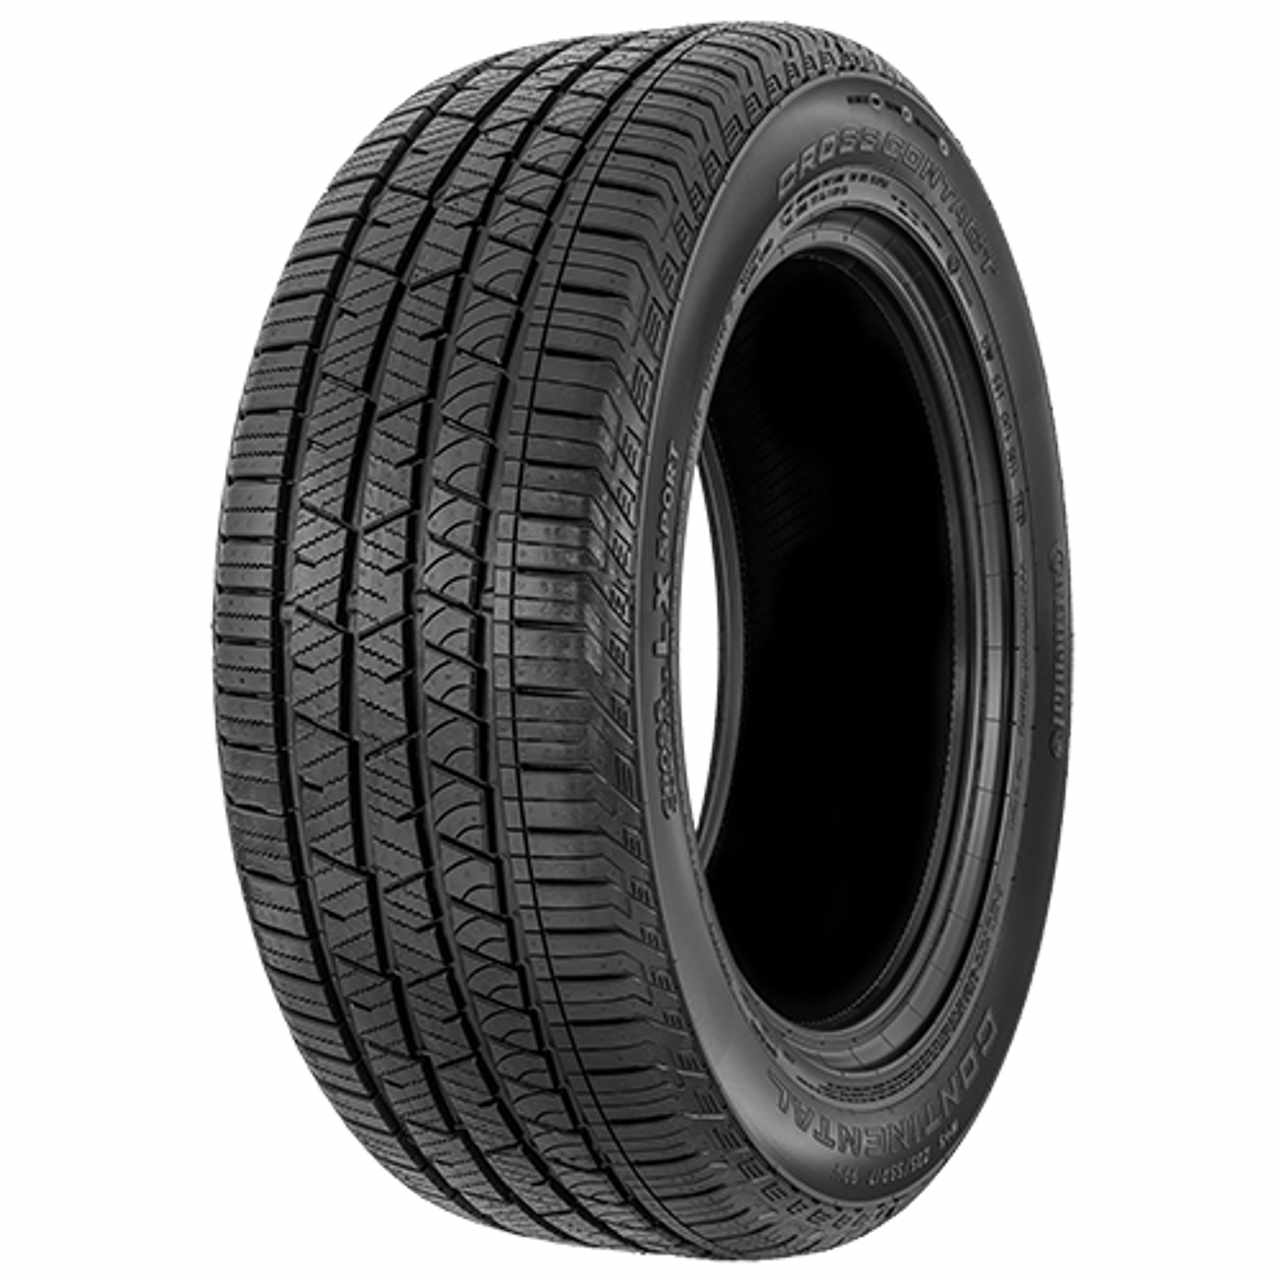 CONTINENTAL CROSSCONTACT LX SPORT (T1) (EVc) 275/45R20 110V CONTISILENT FR BSW XL